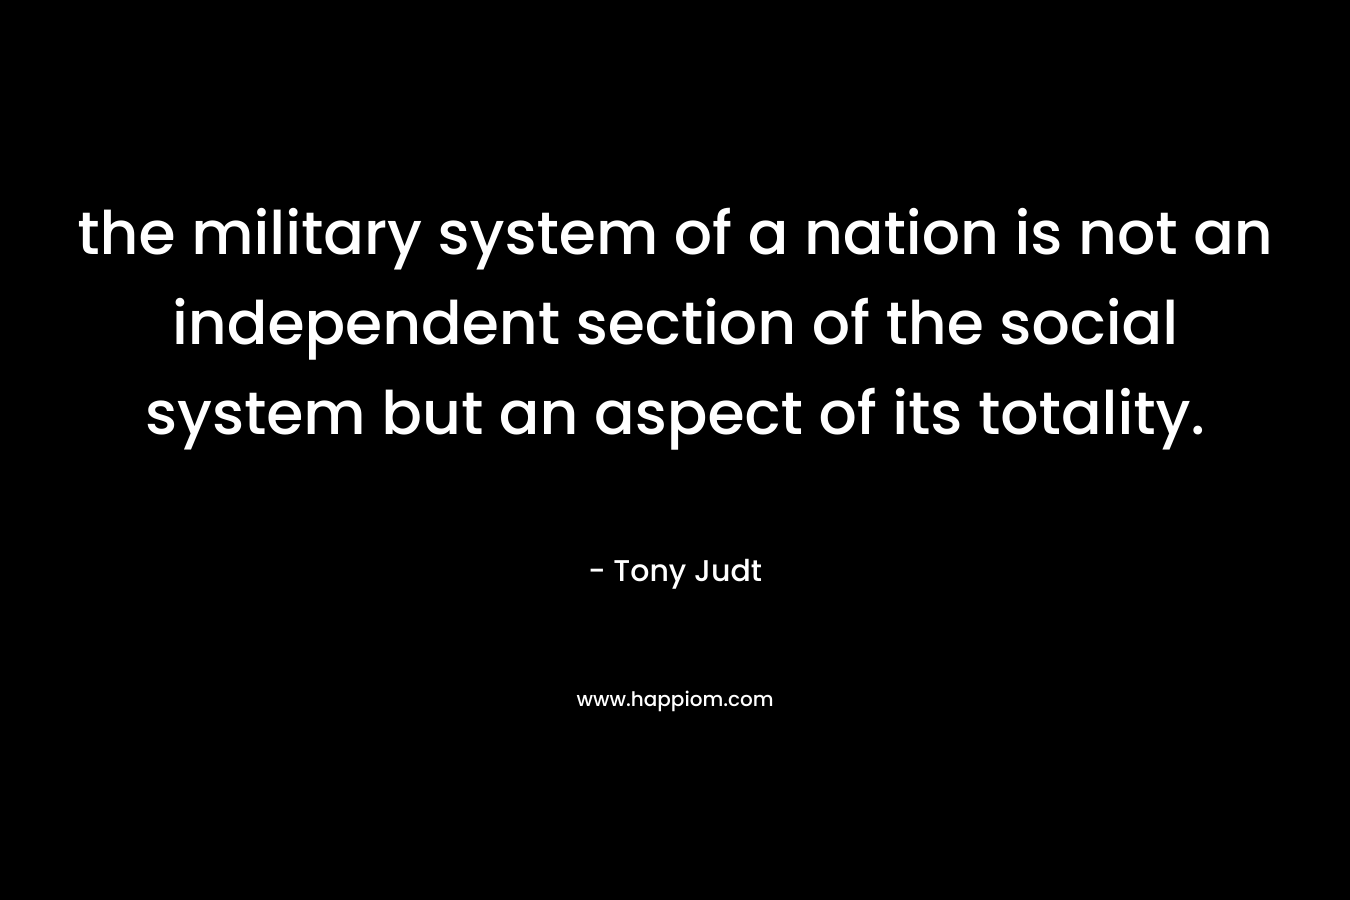 the military system of a nation is not an independent section of the social system but an aspect of its totality. – Tony Judt